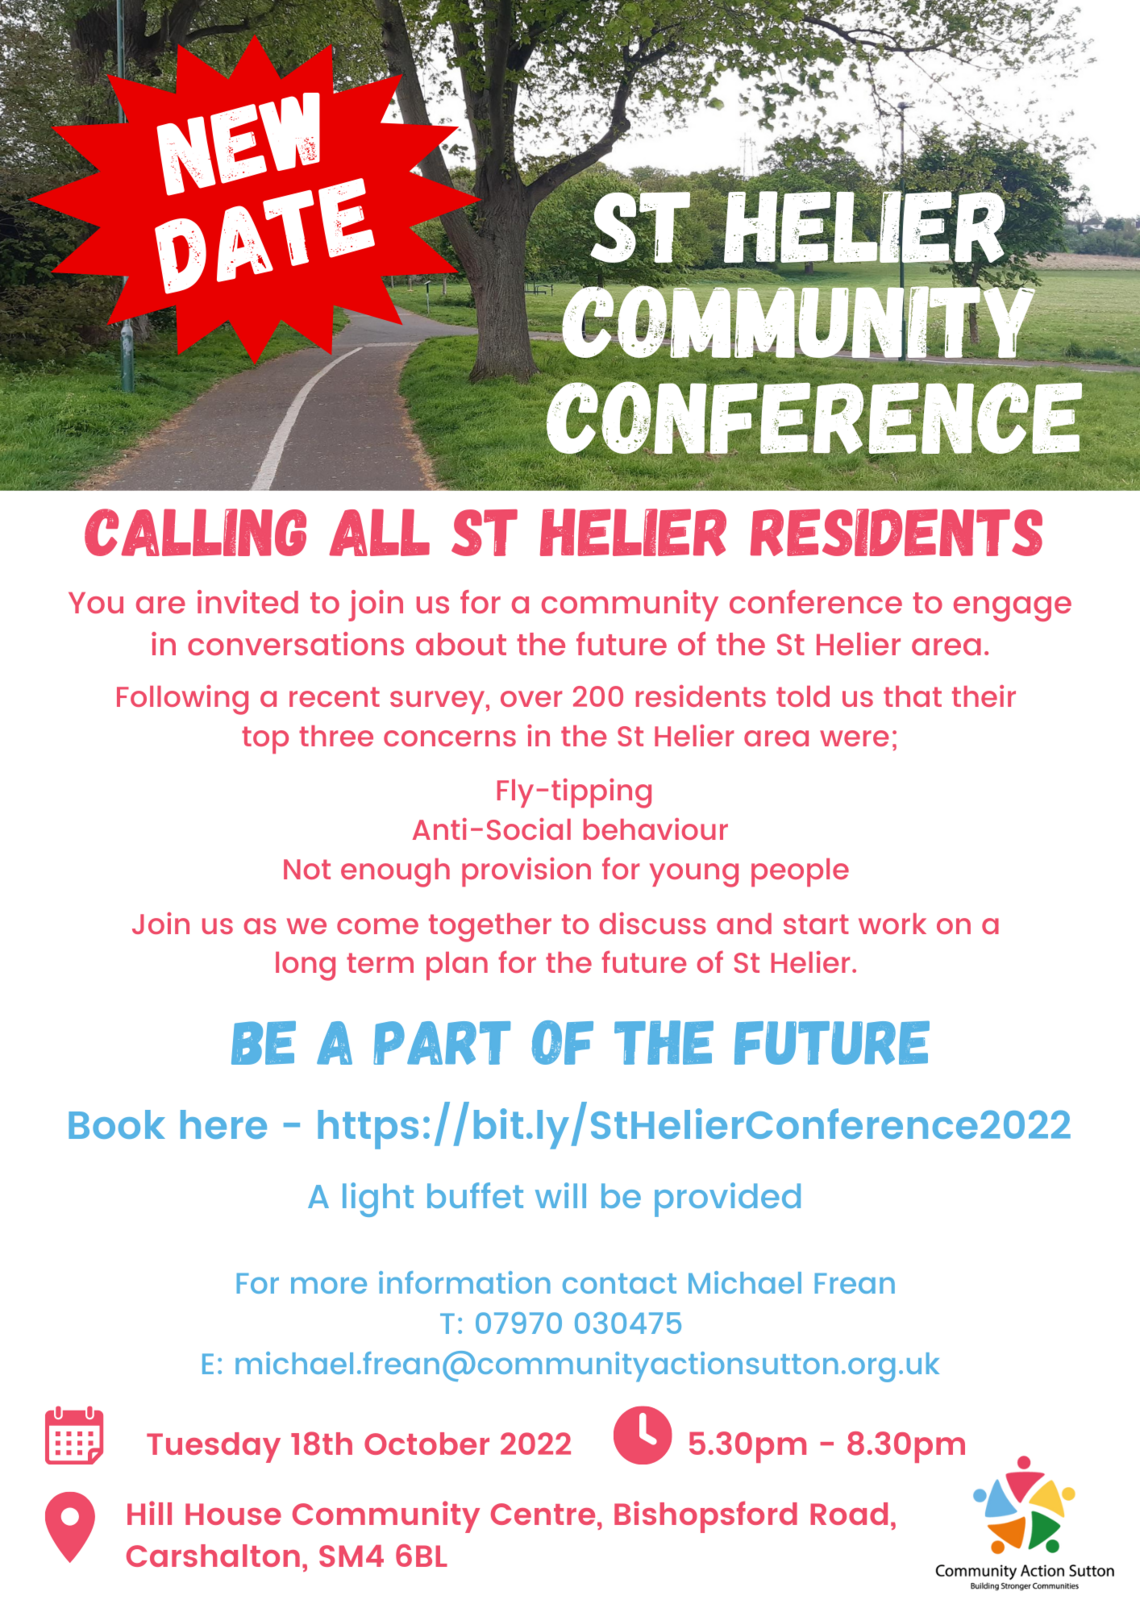 St Helier Community Conference Flyer NEW DATE